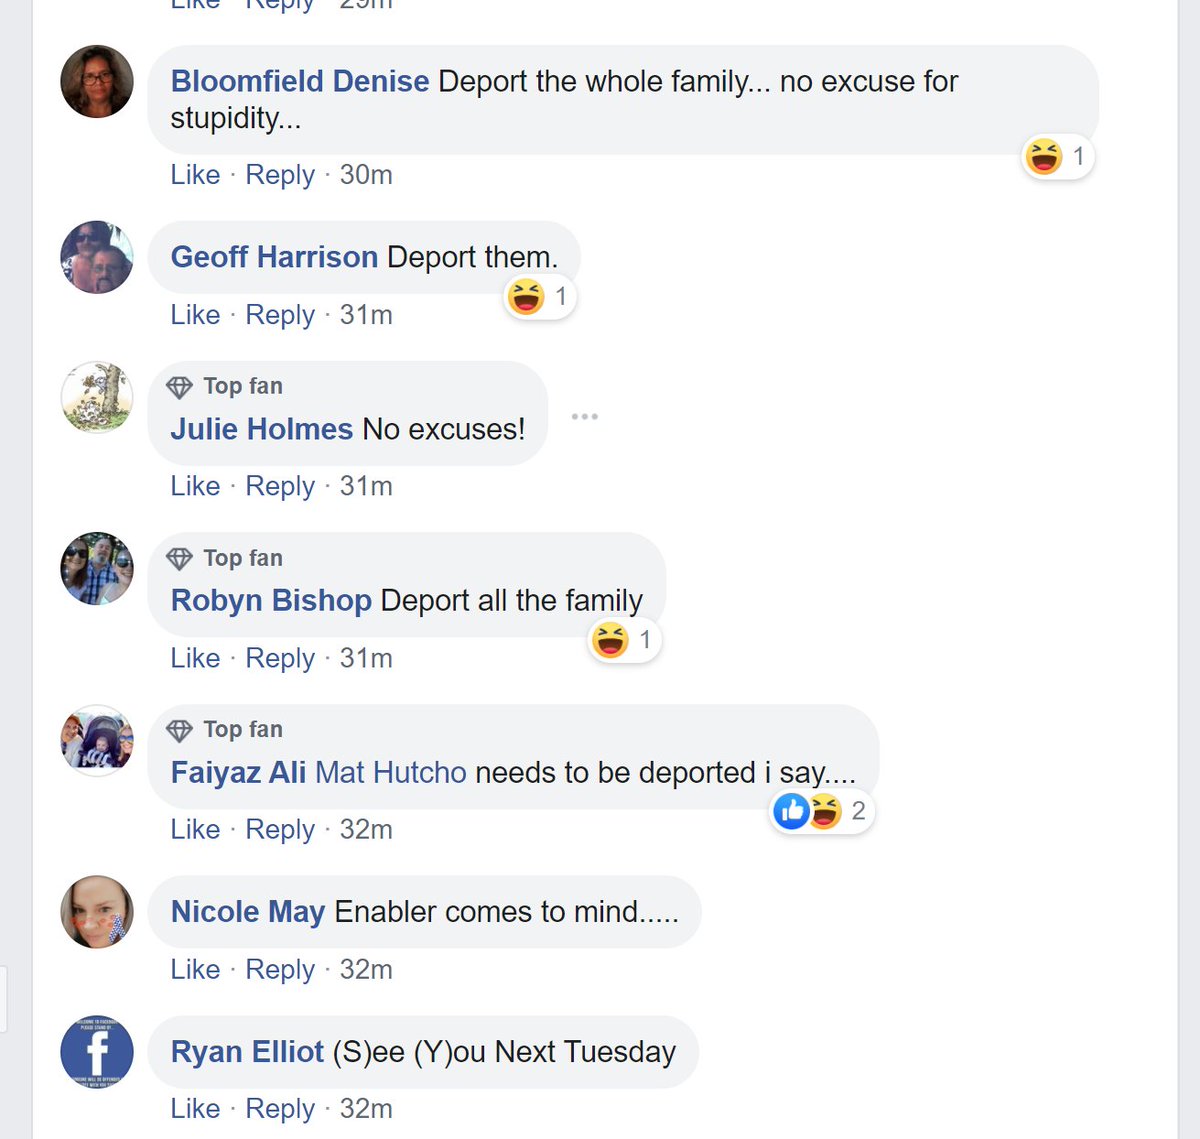 51 minutes after posting, there are already 481 comments on  @newscomauHQ post. Some threaten violence, most call for deportation. There are people wishing death on them. Any journalists concerned about social media abuse out there want to comment? Hello? *taps mic*